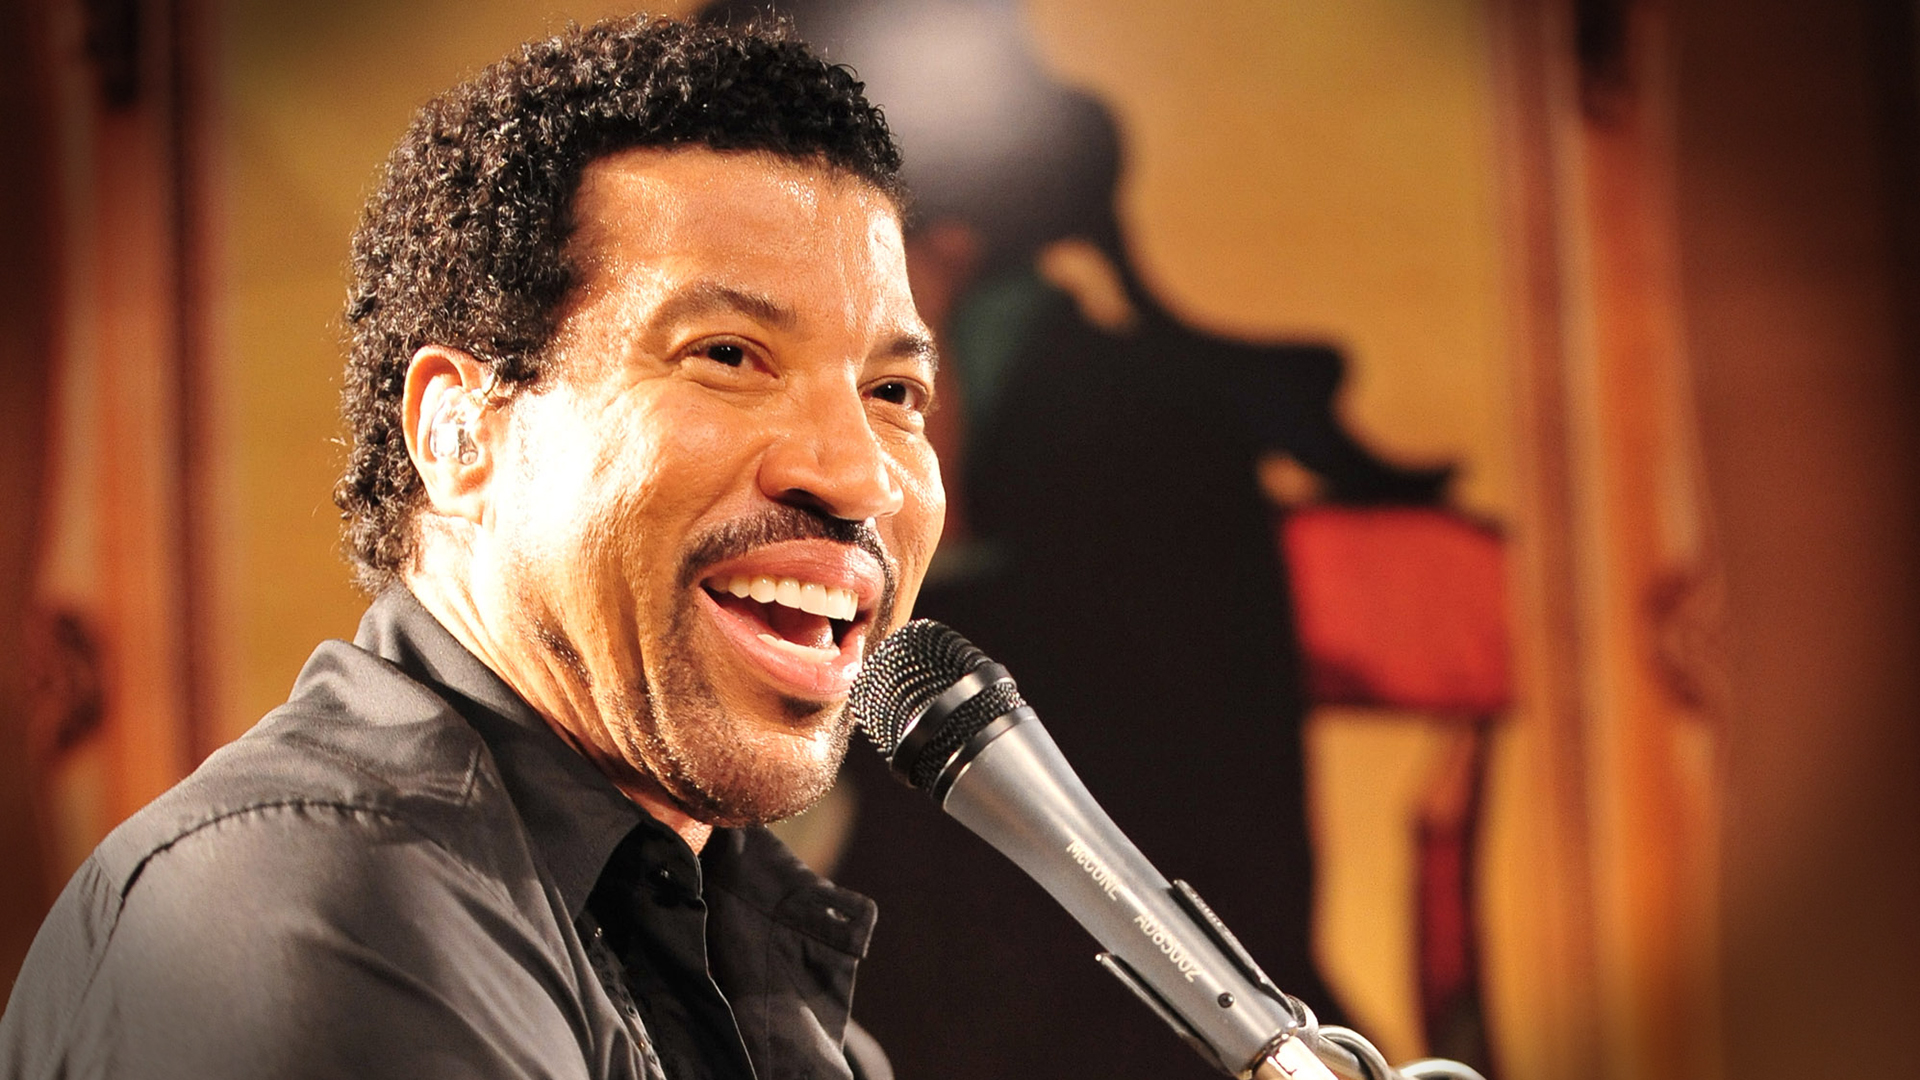 Lionel Richie has sold more than 100 million records worldwide, making him one of the best-selling artists of all time. As front man for the Commodores they ...